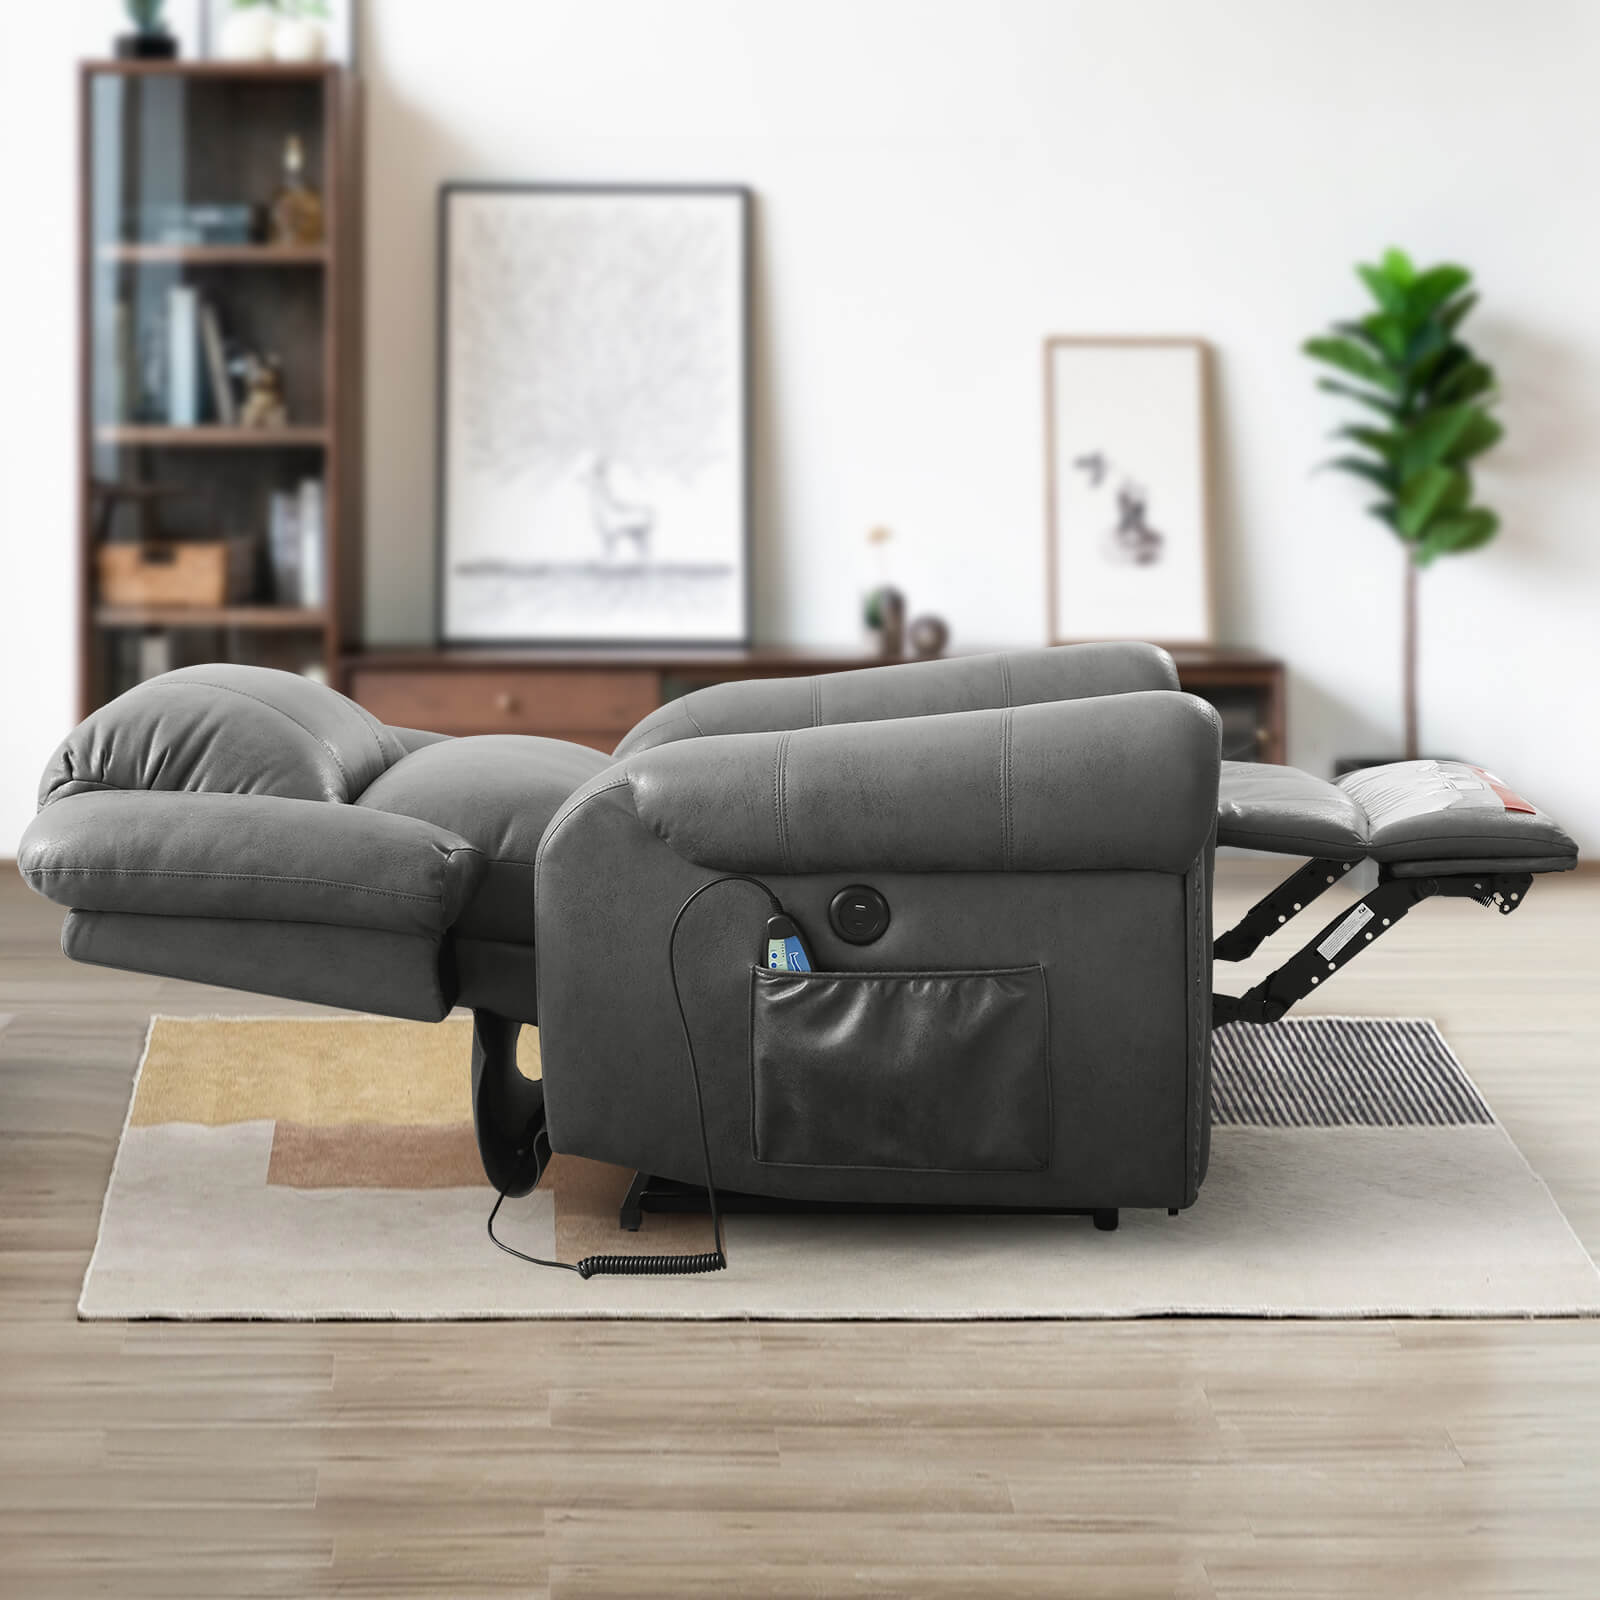 soulout infinite position lift recliner